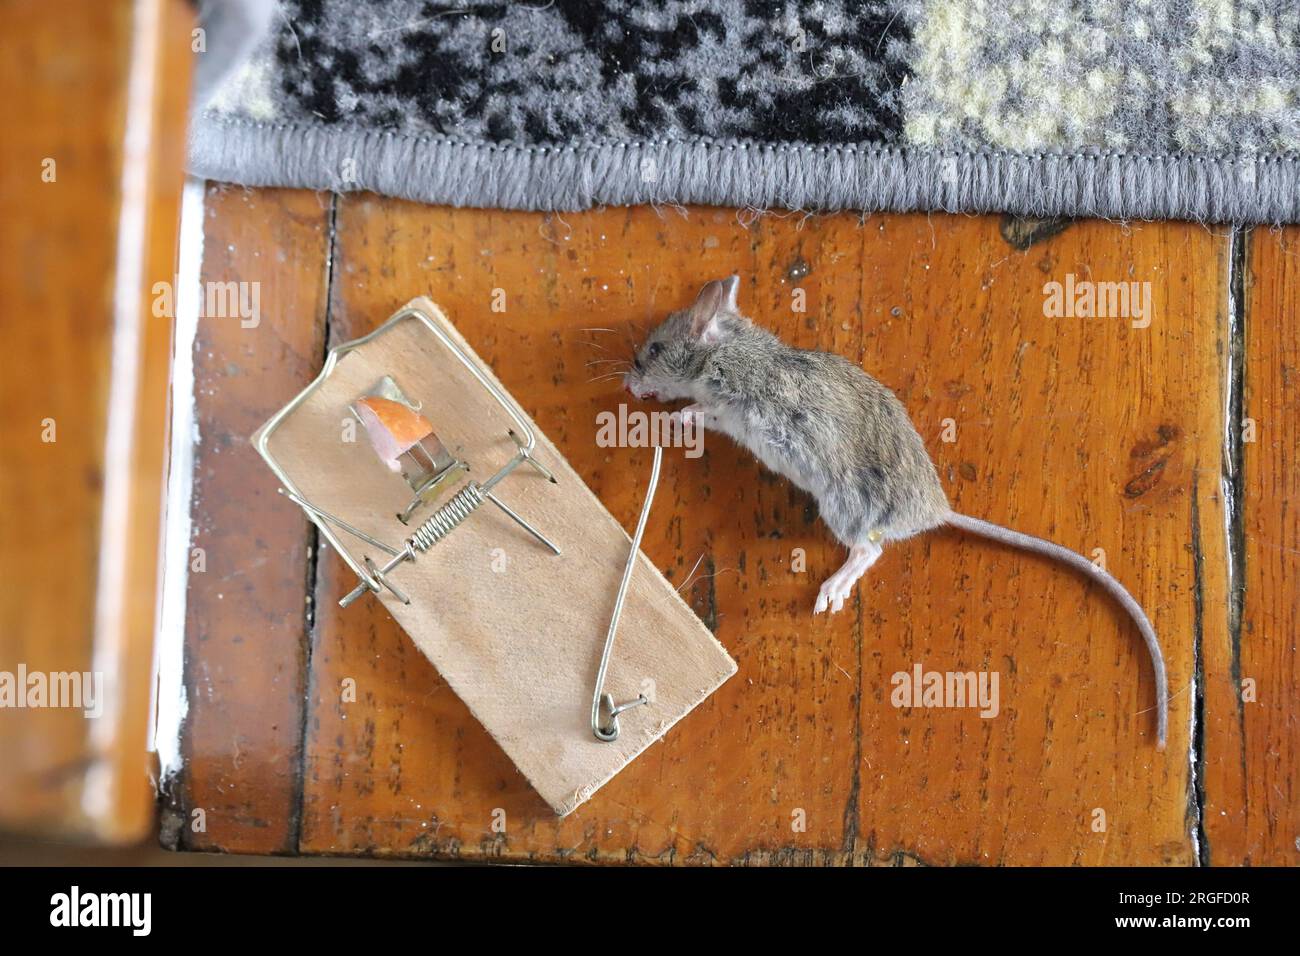 Dead mouse caught in a trap in a house, apartment. Stock Photo